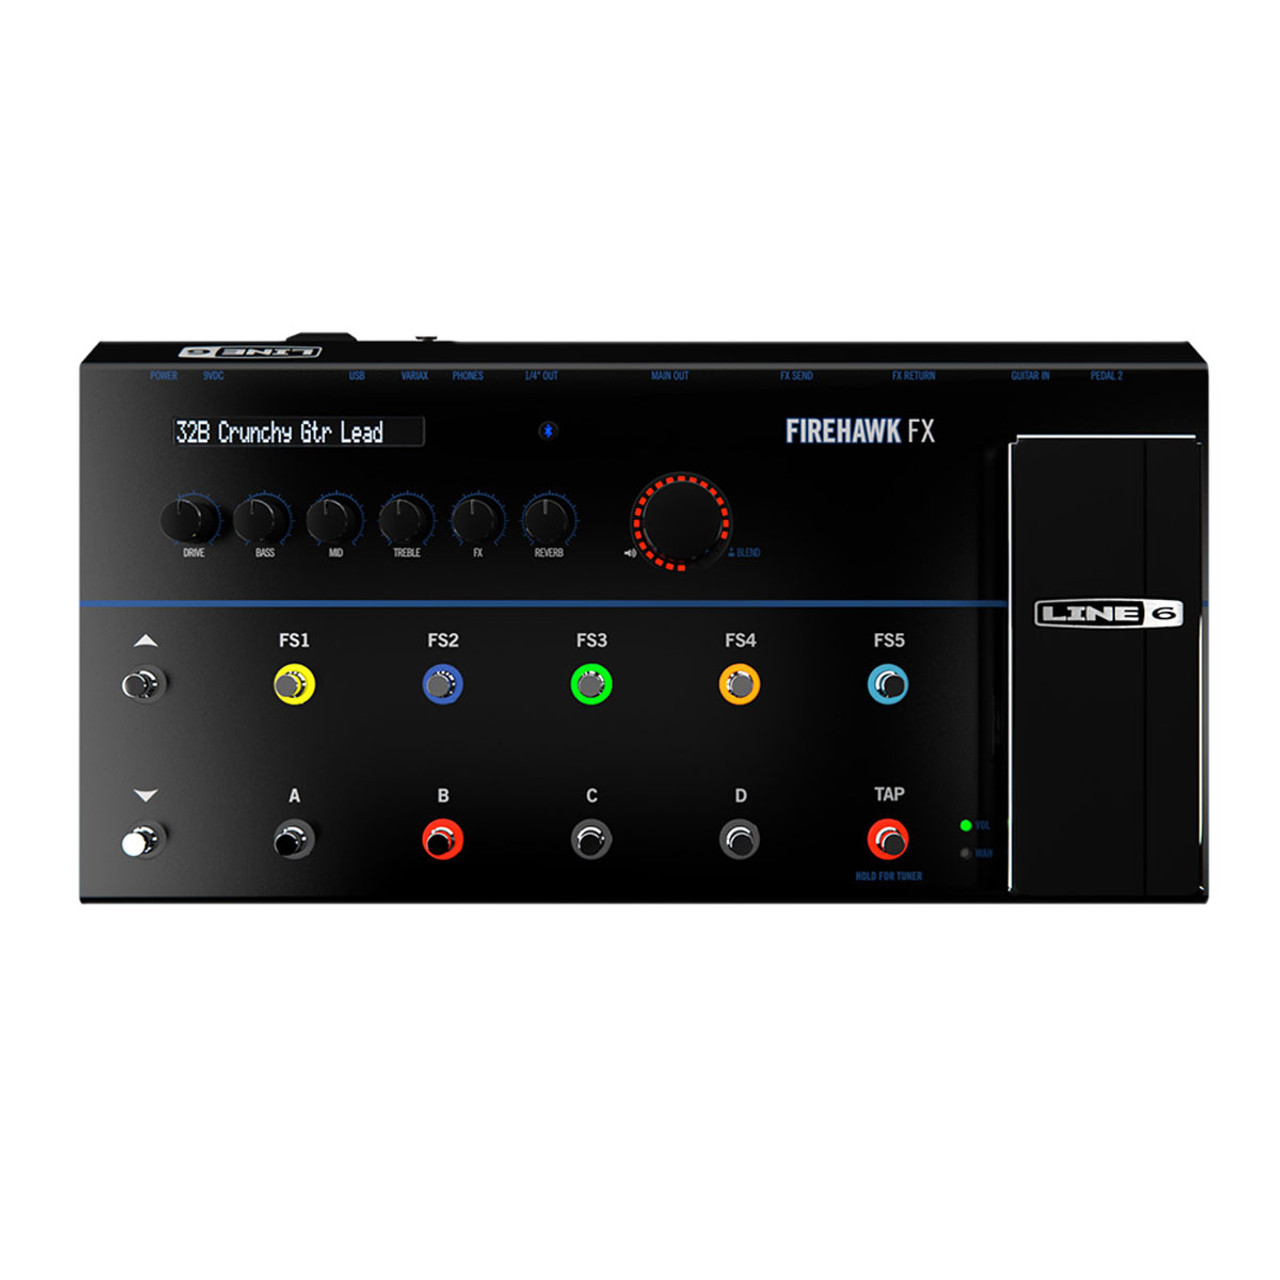 Firehawk FX HD Multi-Effect with iOS/Android App Control - Line 6